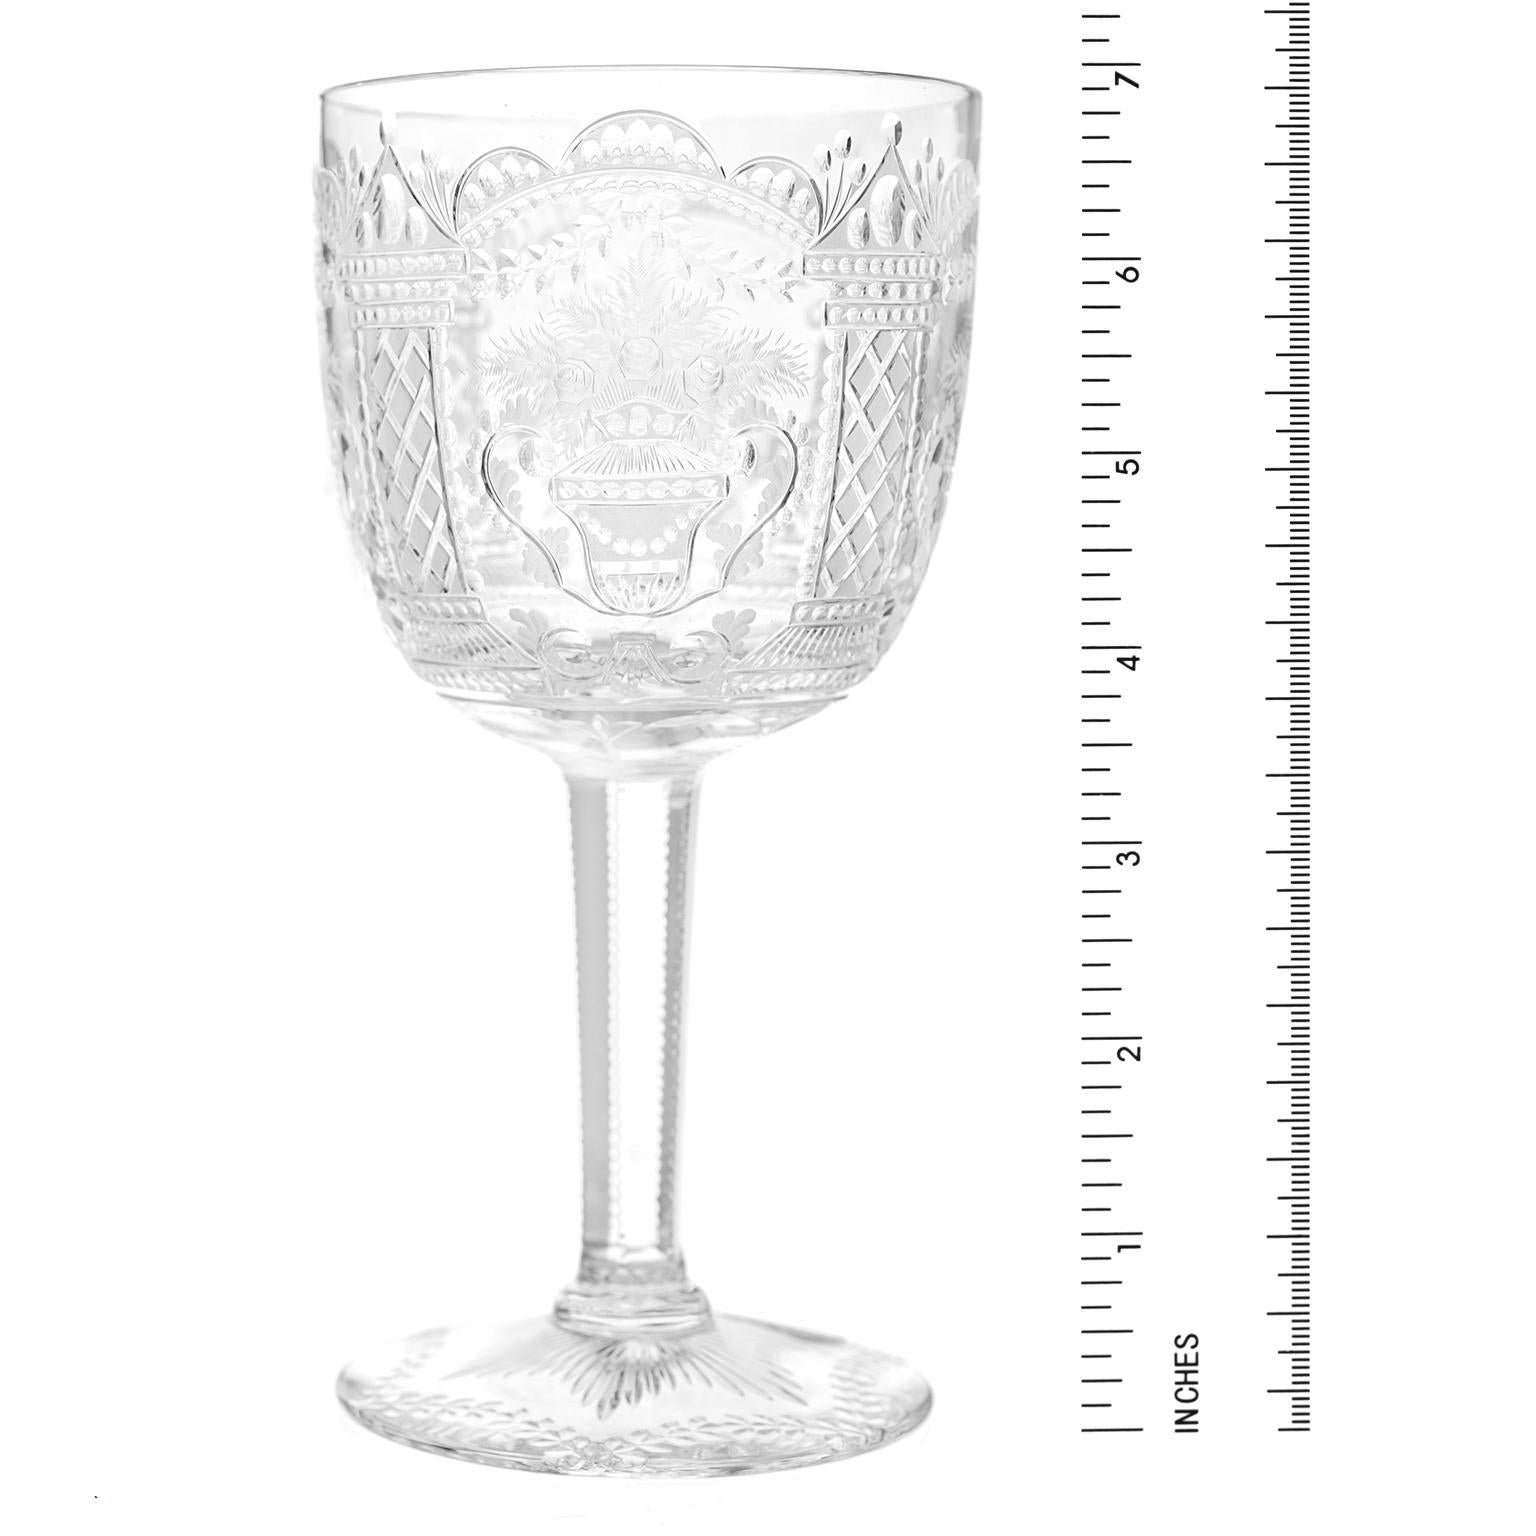 German One-of-a-Kind Set of 12 Cut Crystal Goblets by Erwin Krause for Tharaud Designs For Sale